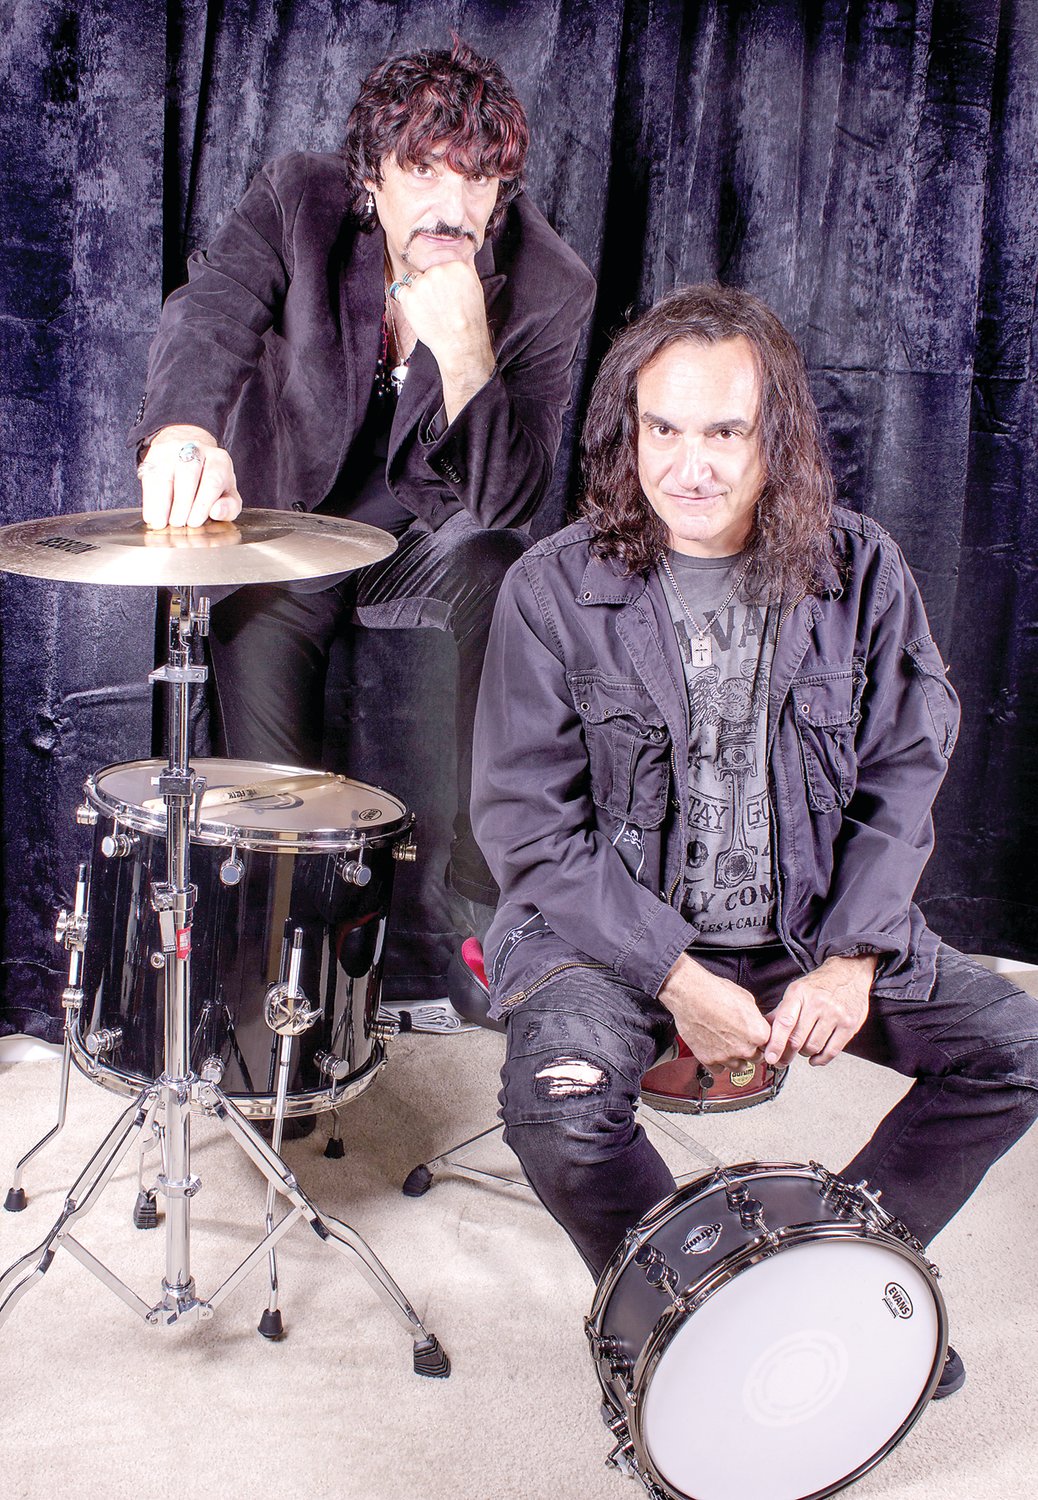 Brothers Carmine, left, and Vinny Appice perform with the all Star Band Feb. 6 in Sellersville.